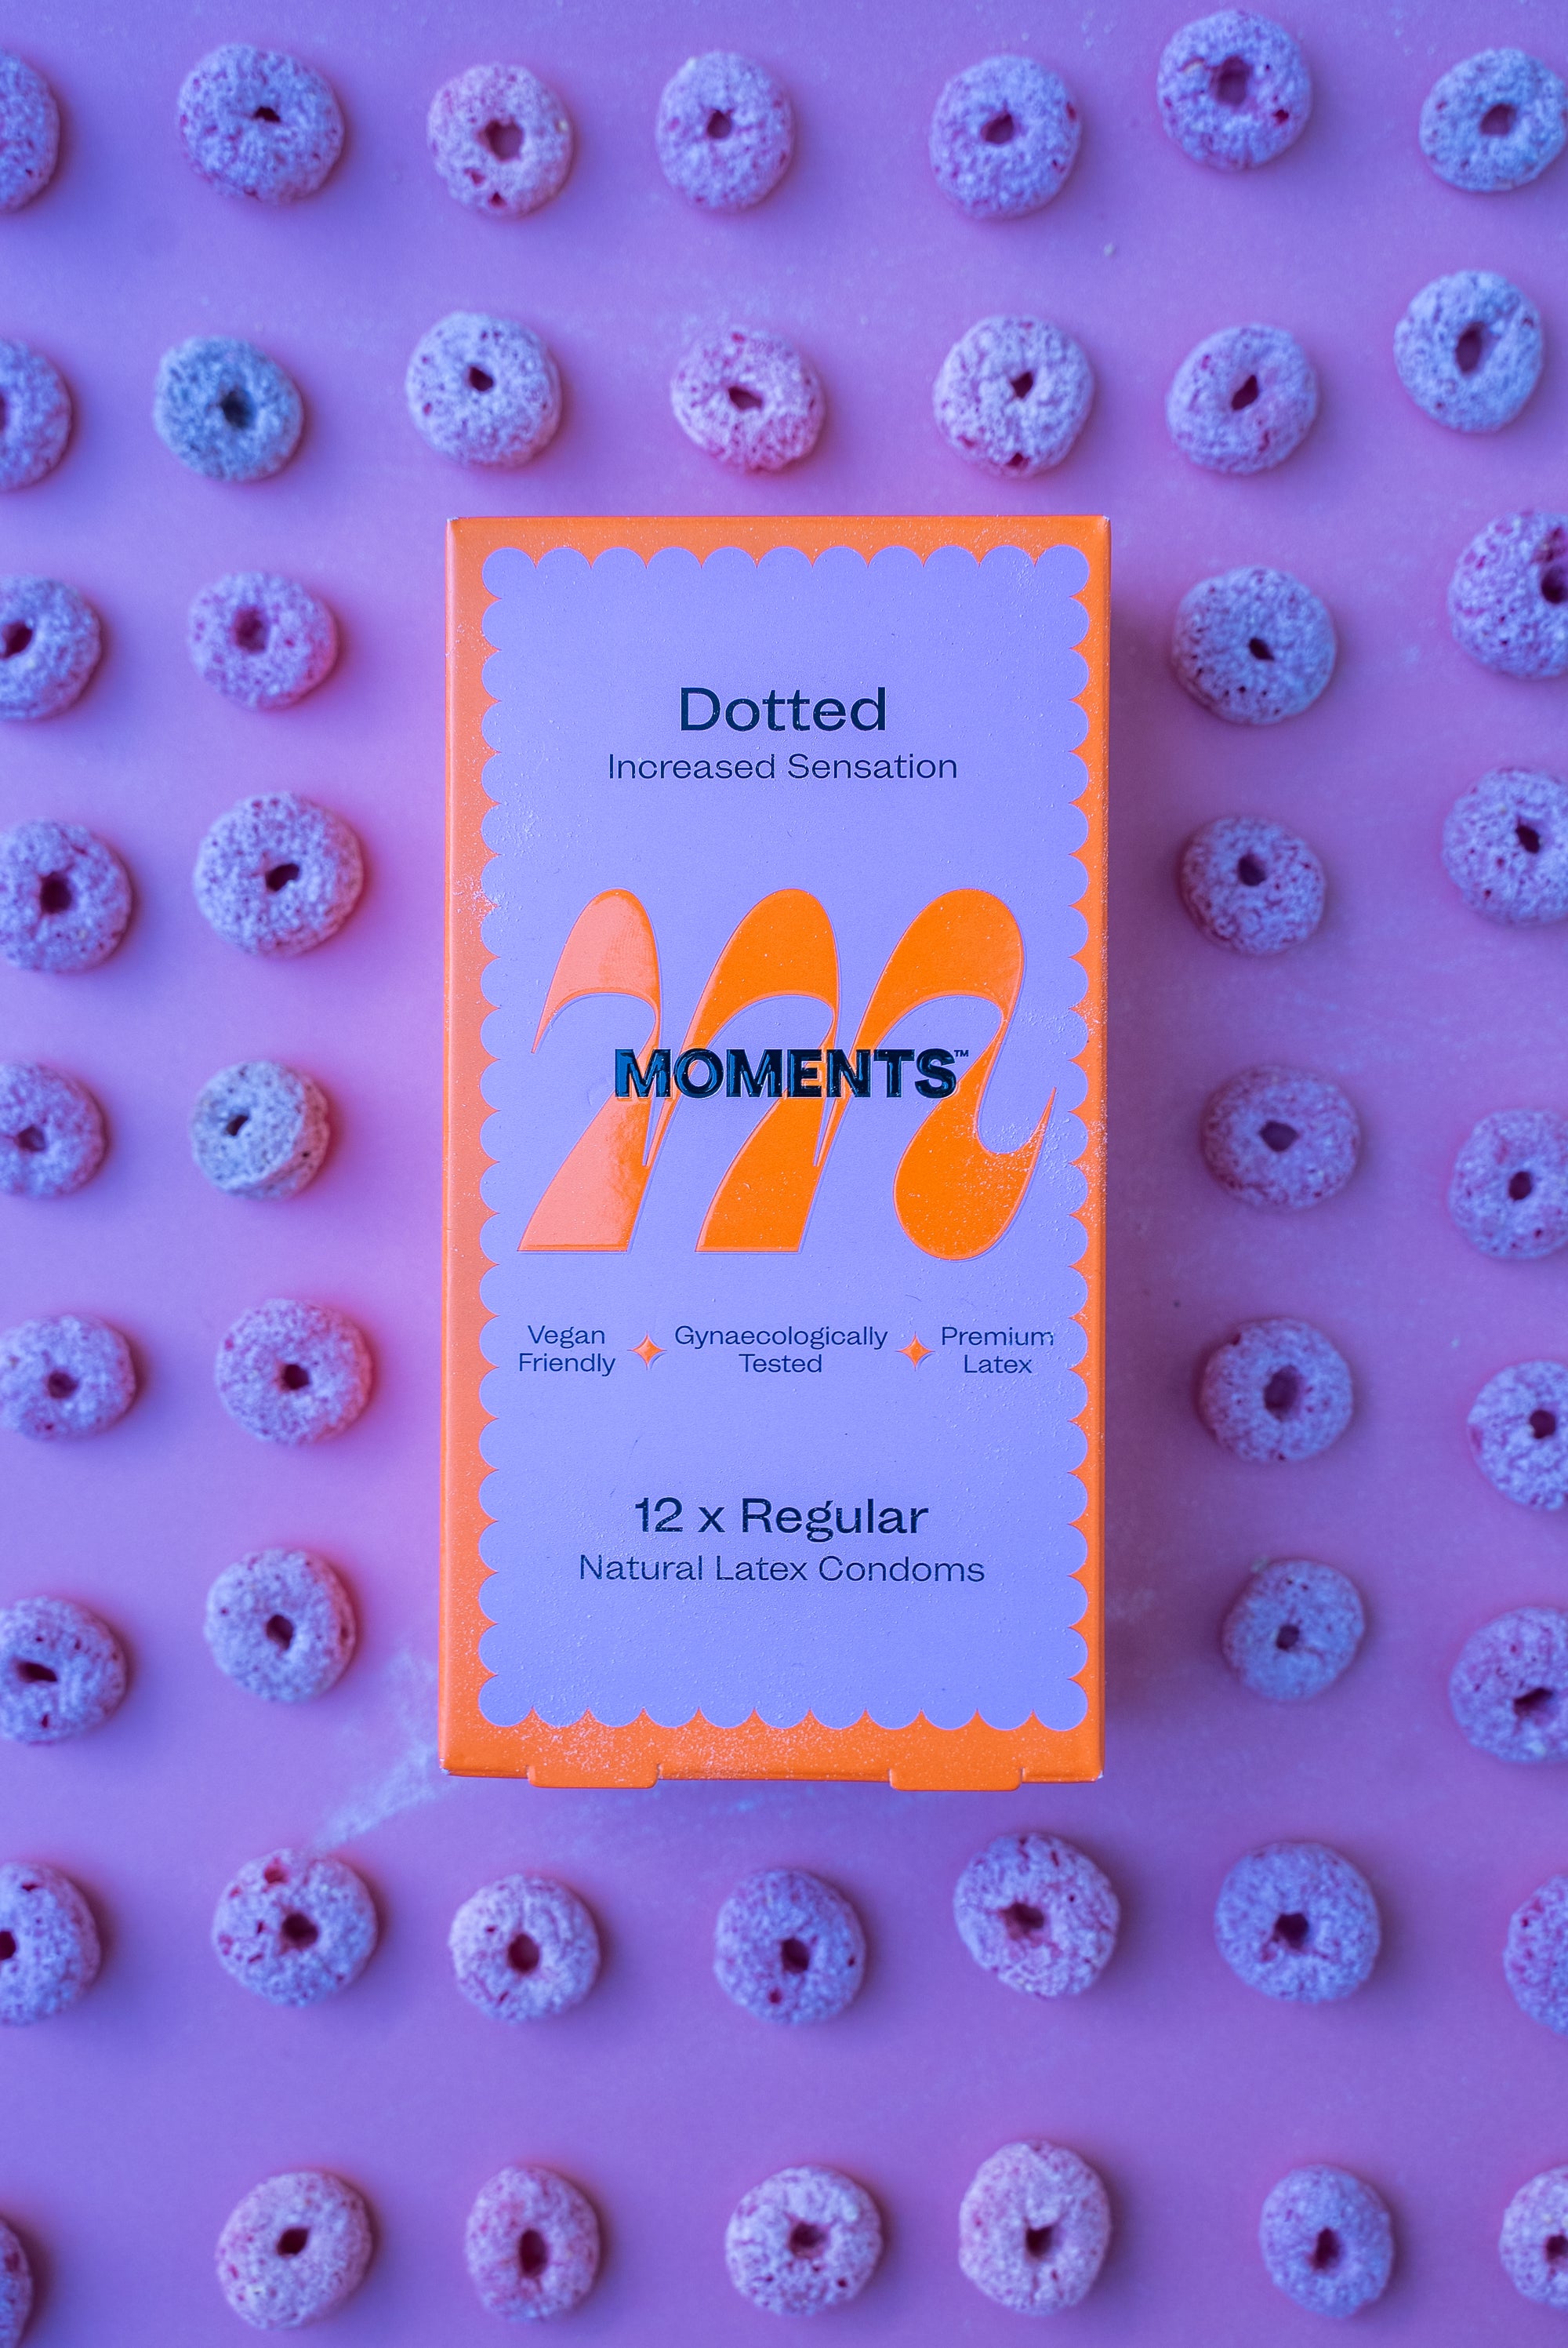 Moments Dotted condoms advertised as a new product with a fruit-themed design